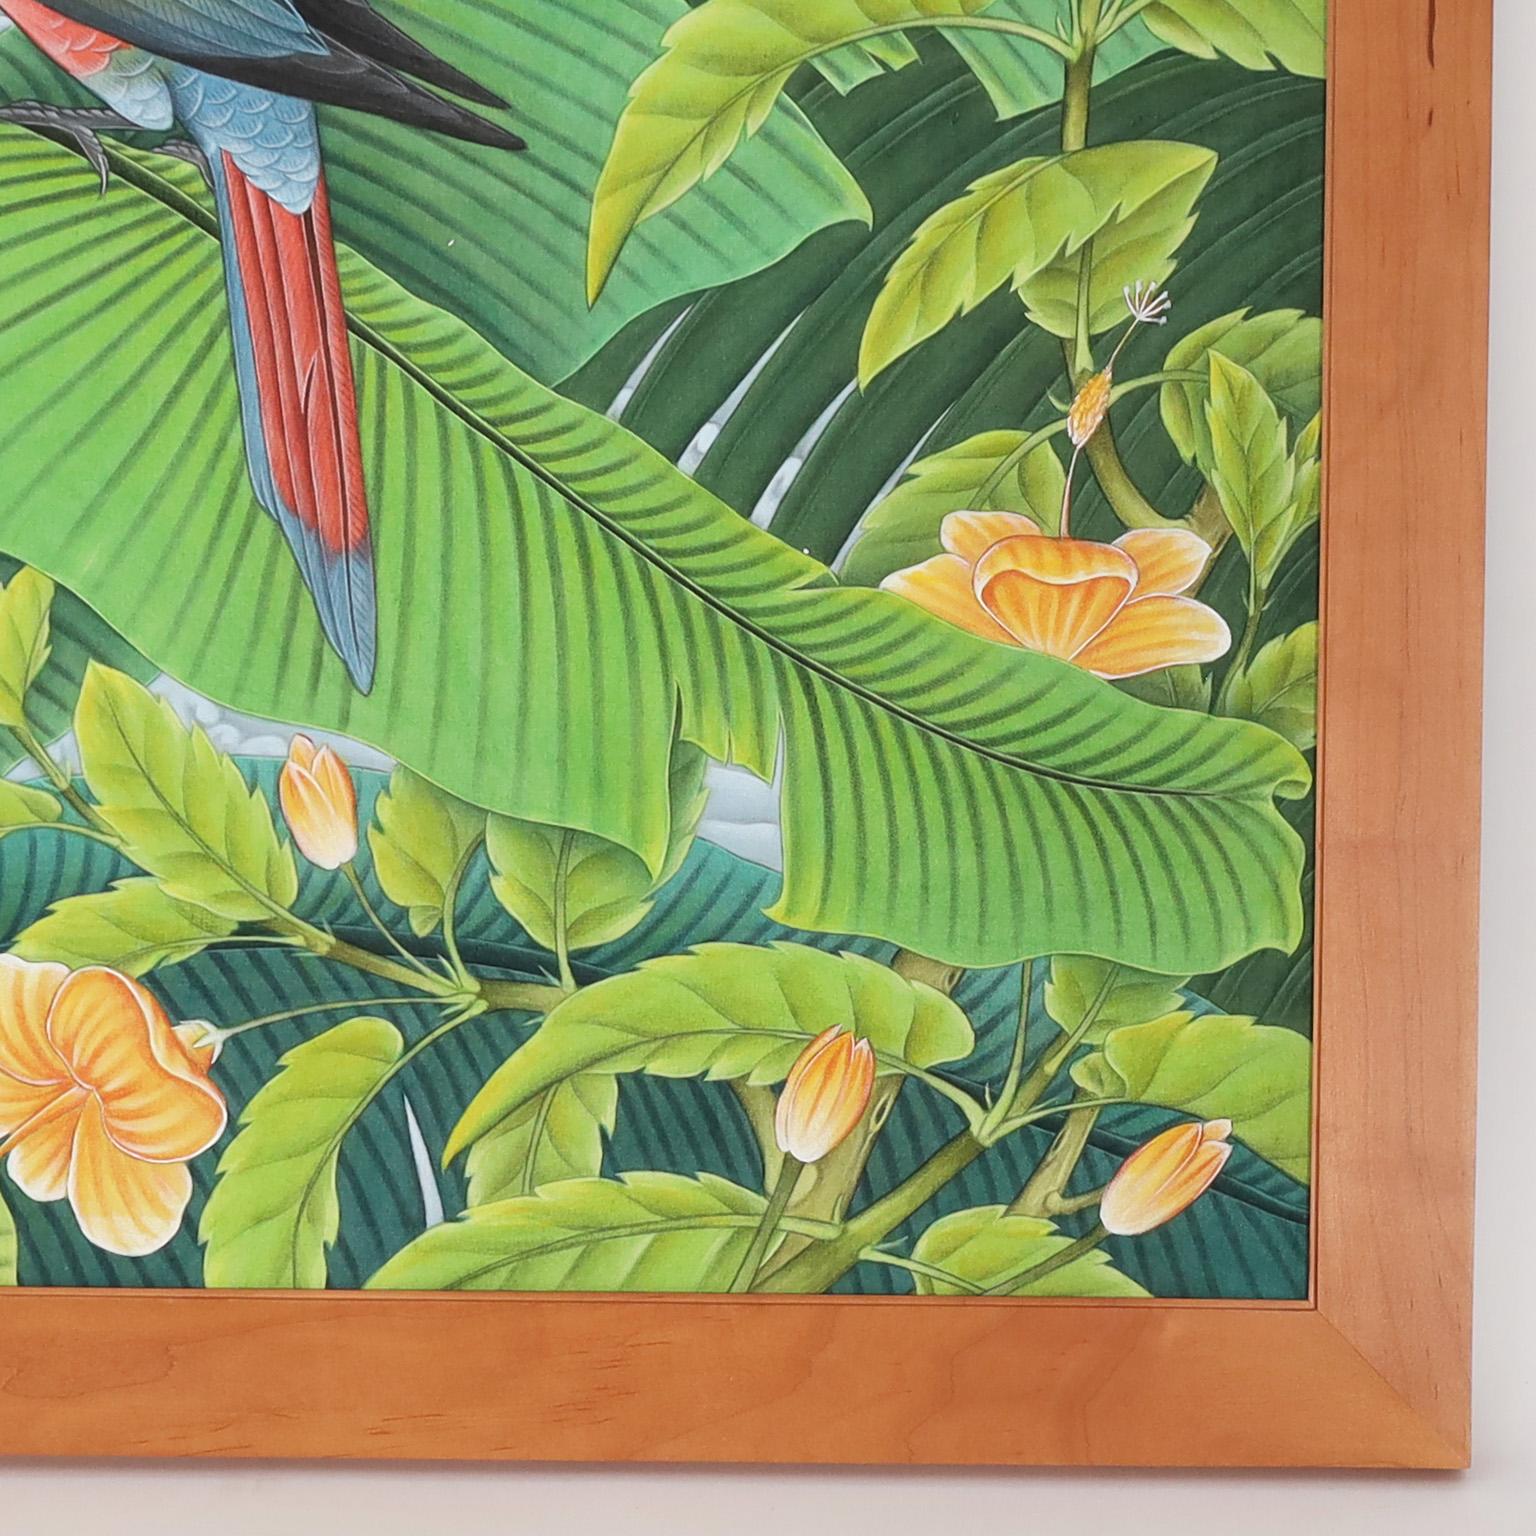 Balinese Painting on Canvas with Parrots and Flowers